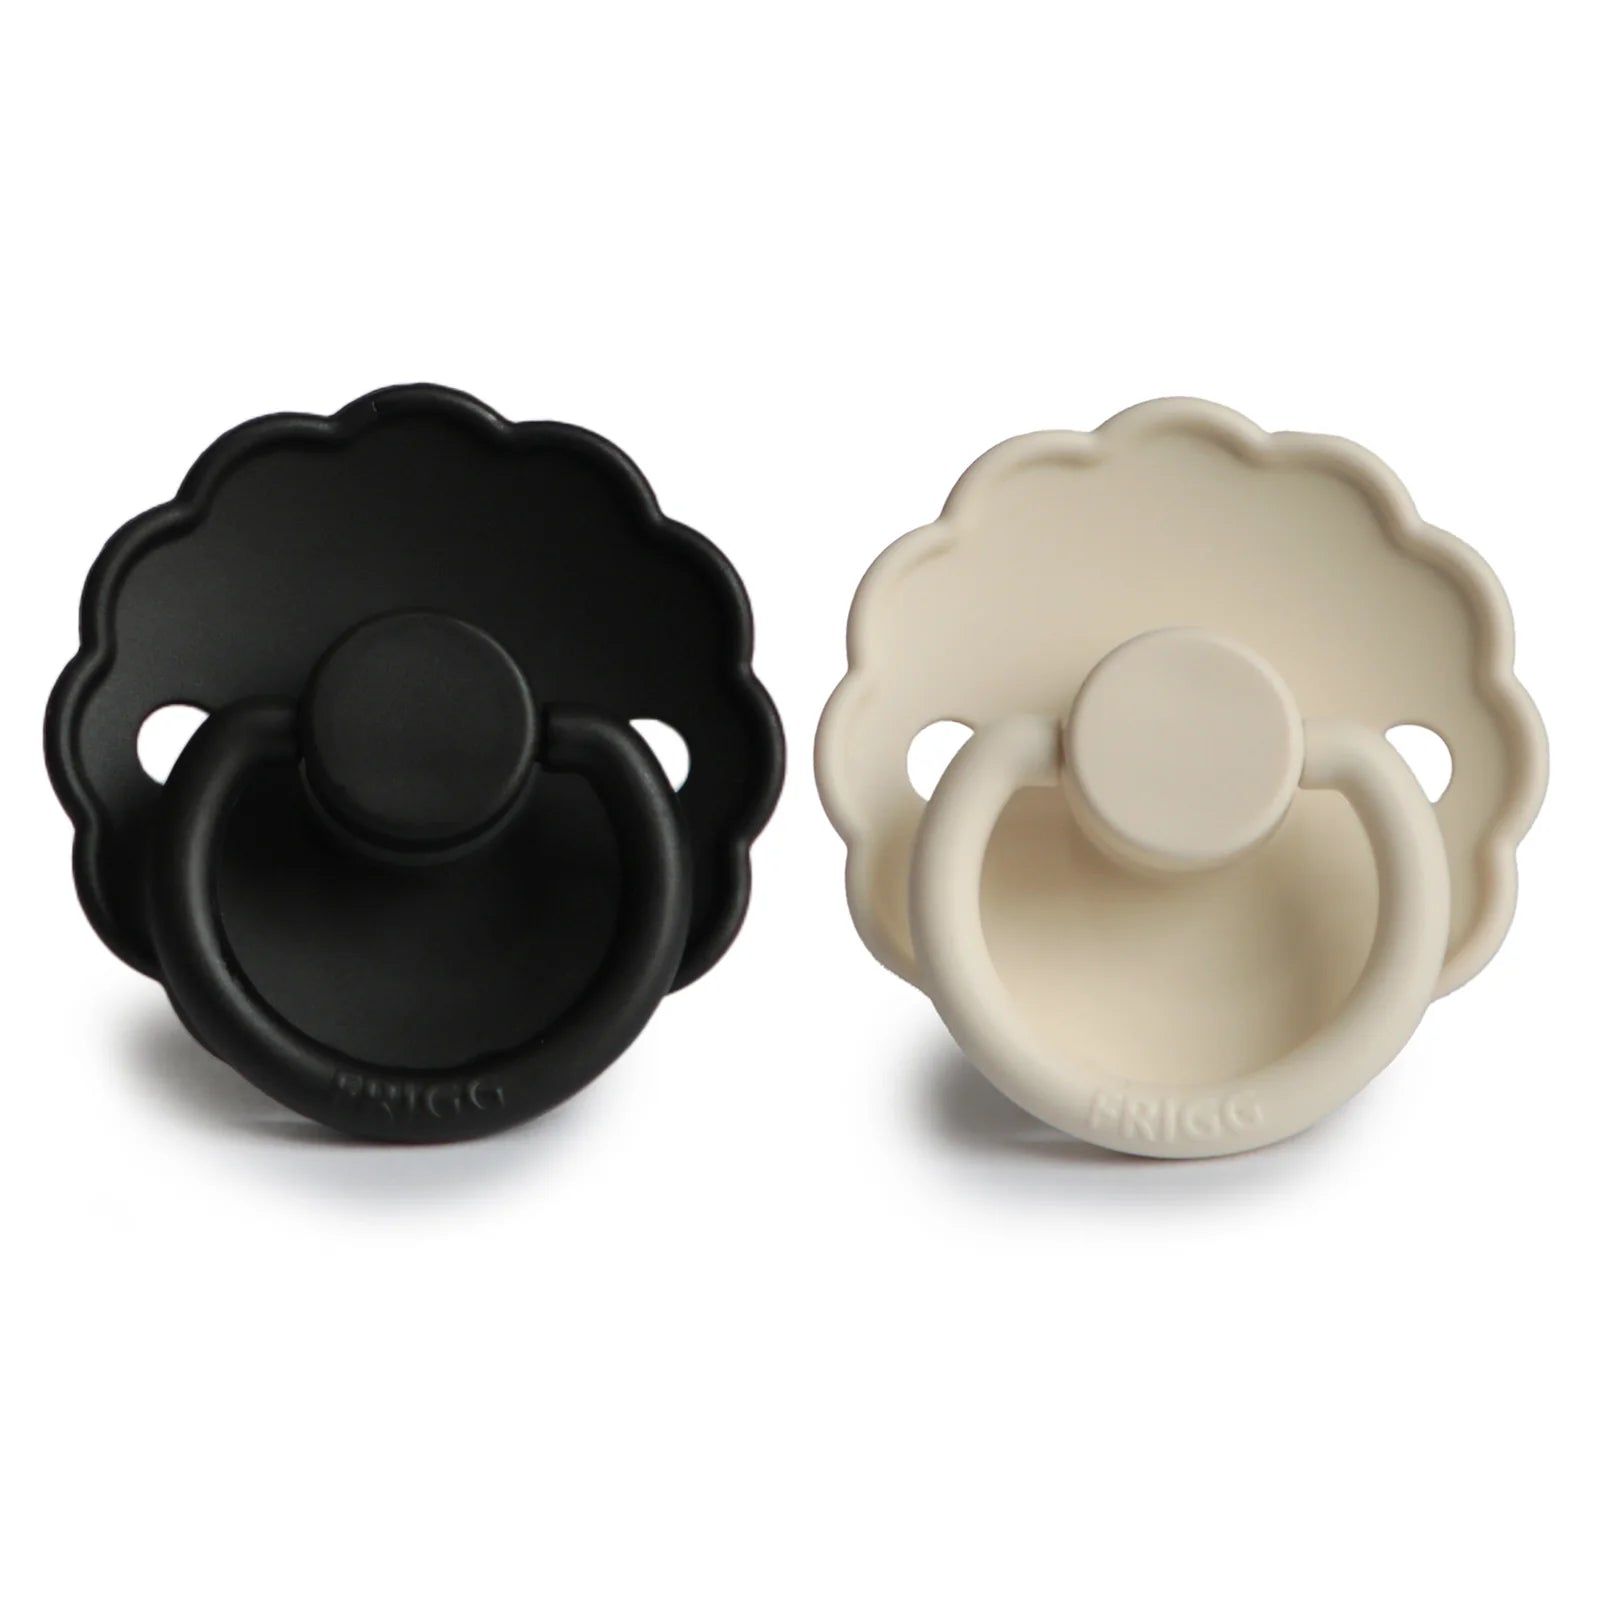 FRIGG Daisy Silicone Baby Pacifier (Jet Black/Cream) 2-Pack